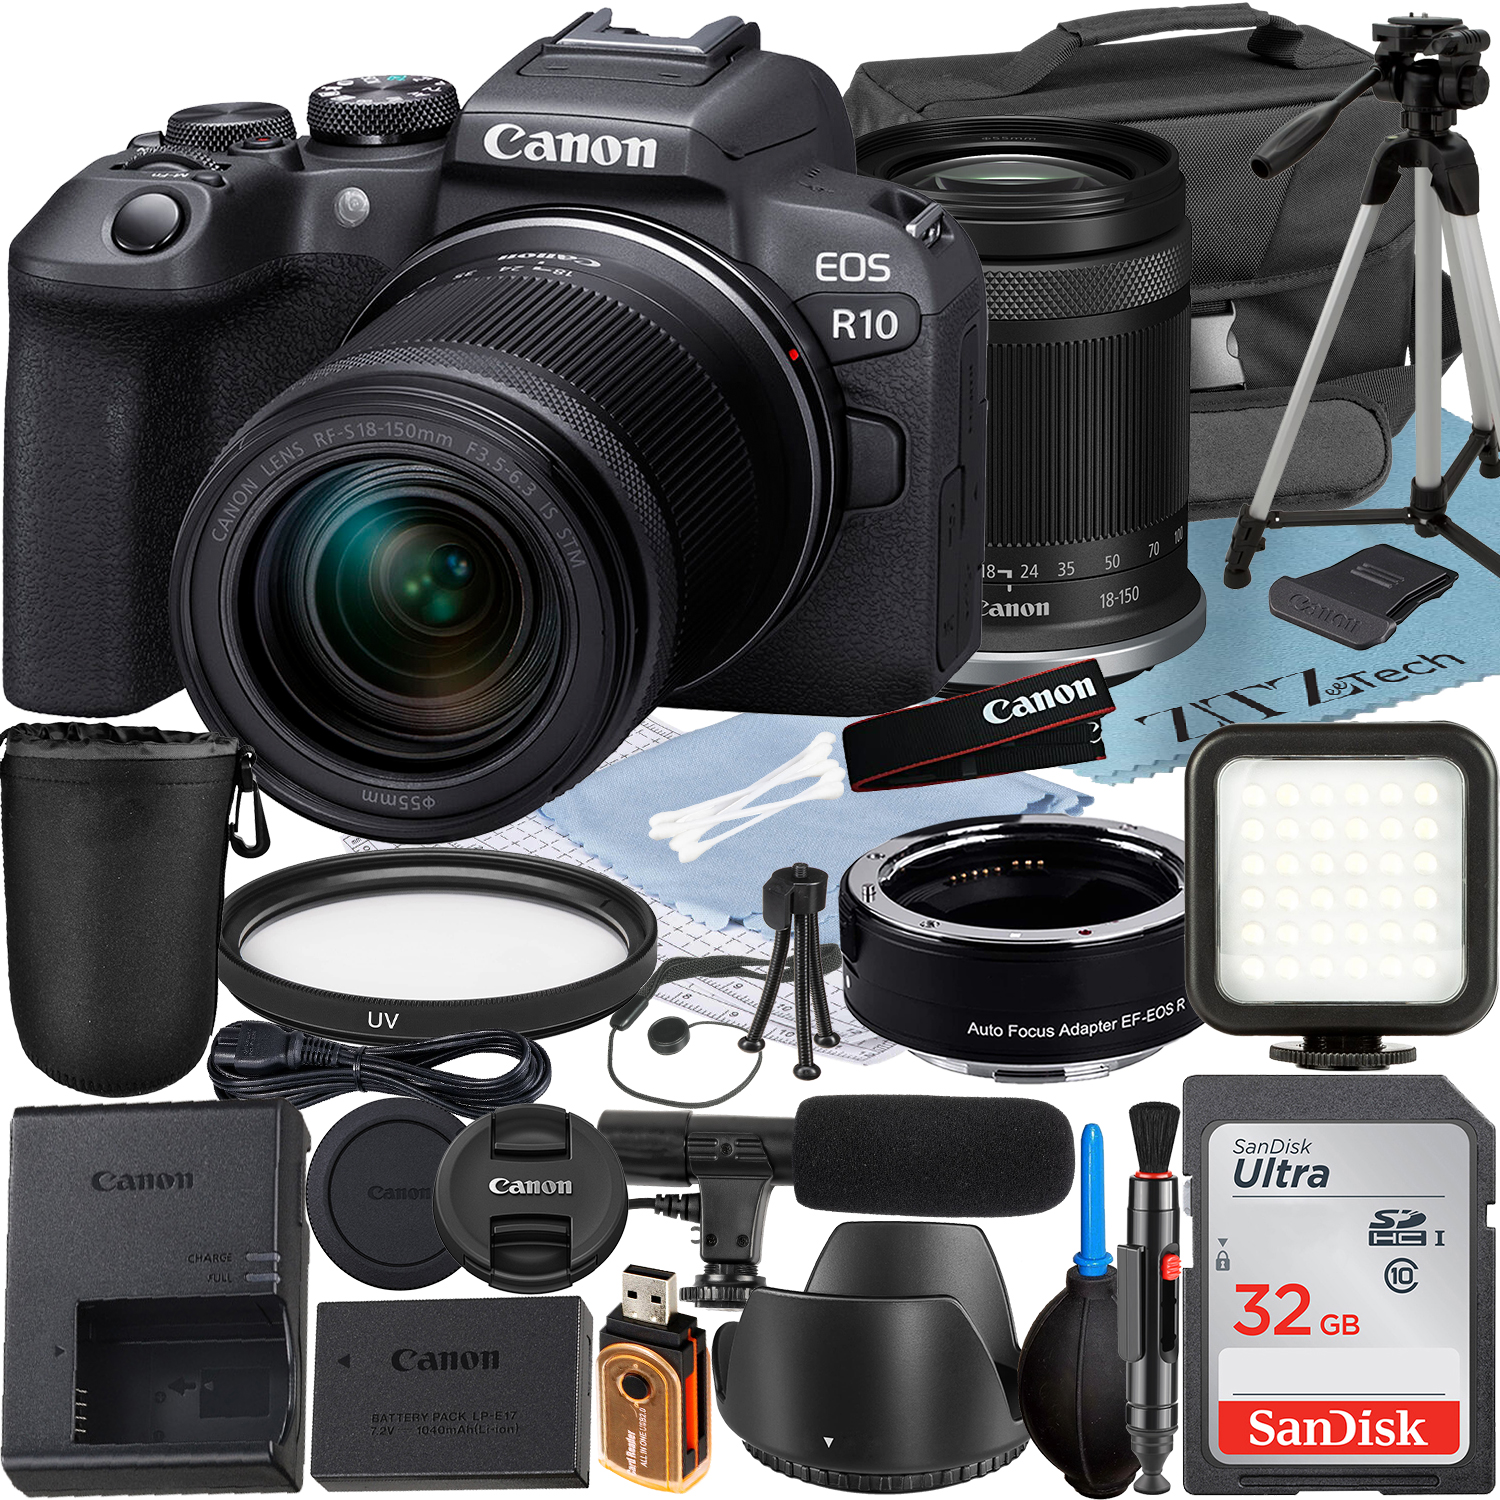 Canon EOS R10 Mirrorless Camera with RF-S 18-150mm Lens + Mount Adapter + SanDisk 32GB Memory Card + Case + LED Flash + ZeeTech Accessory Bundle